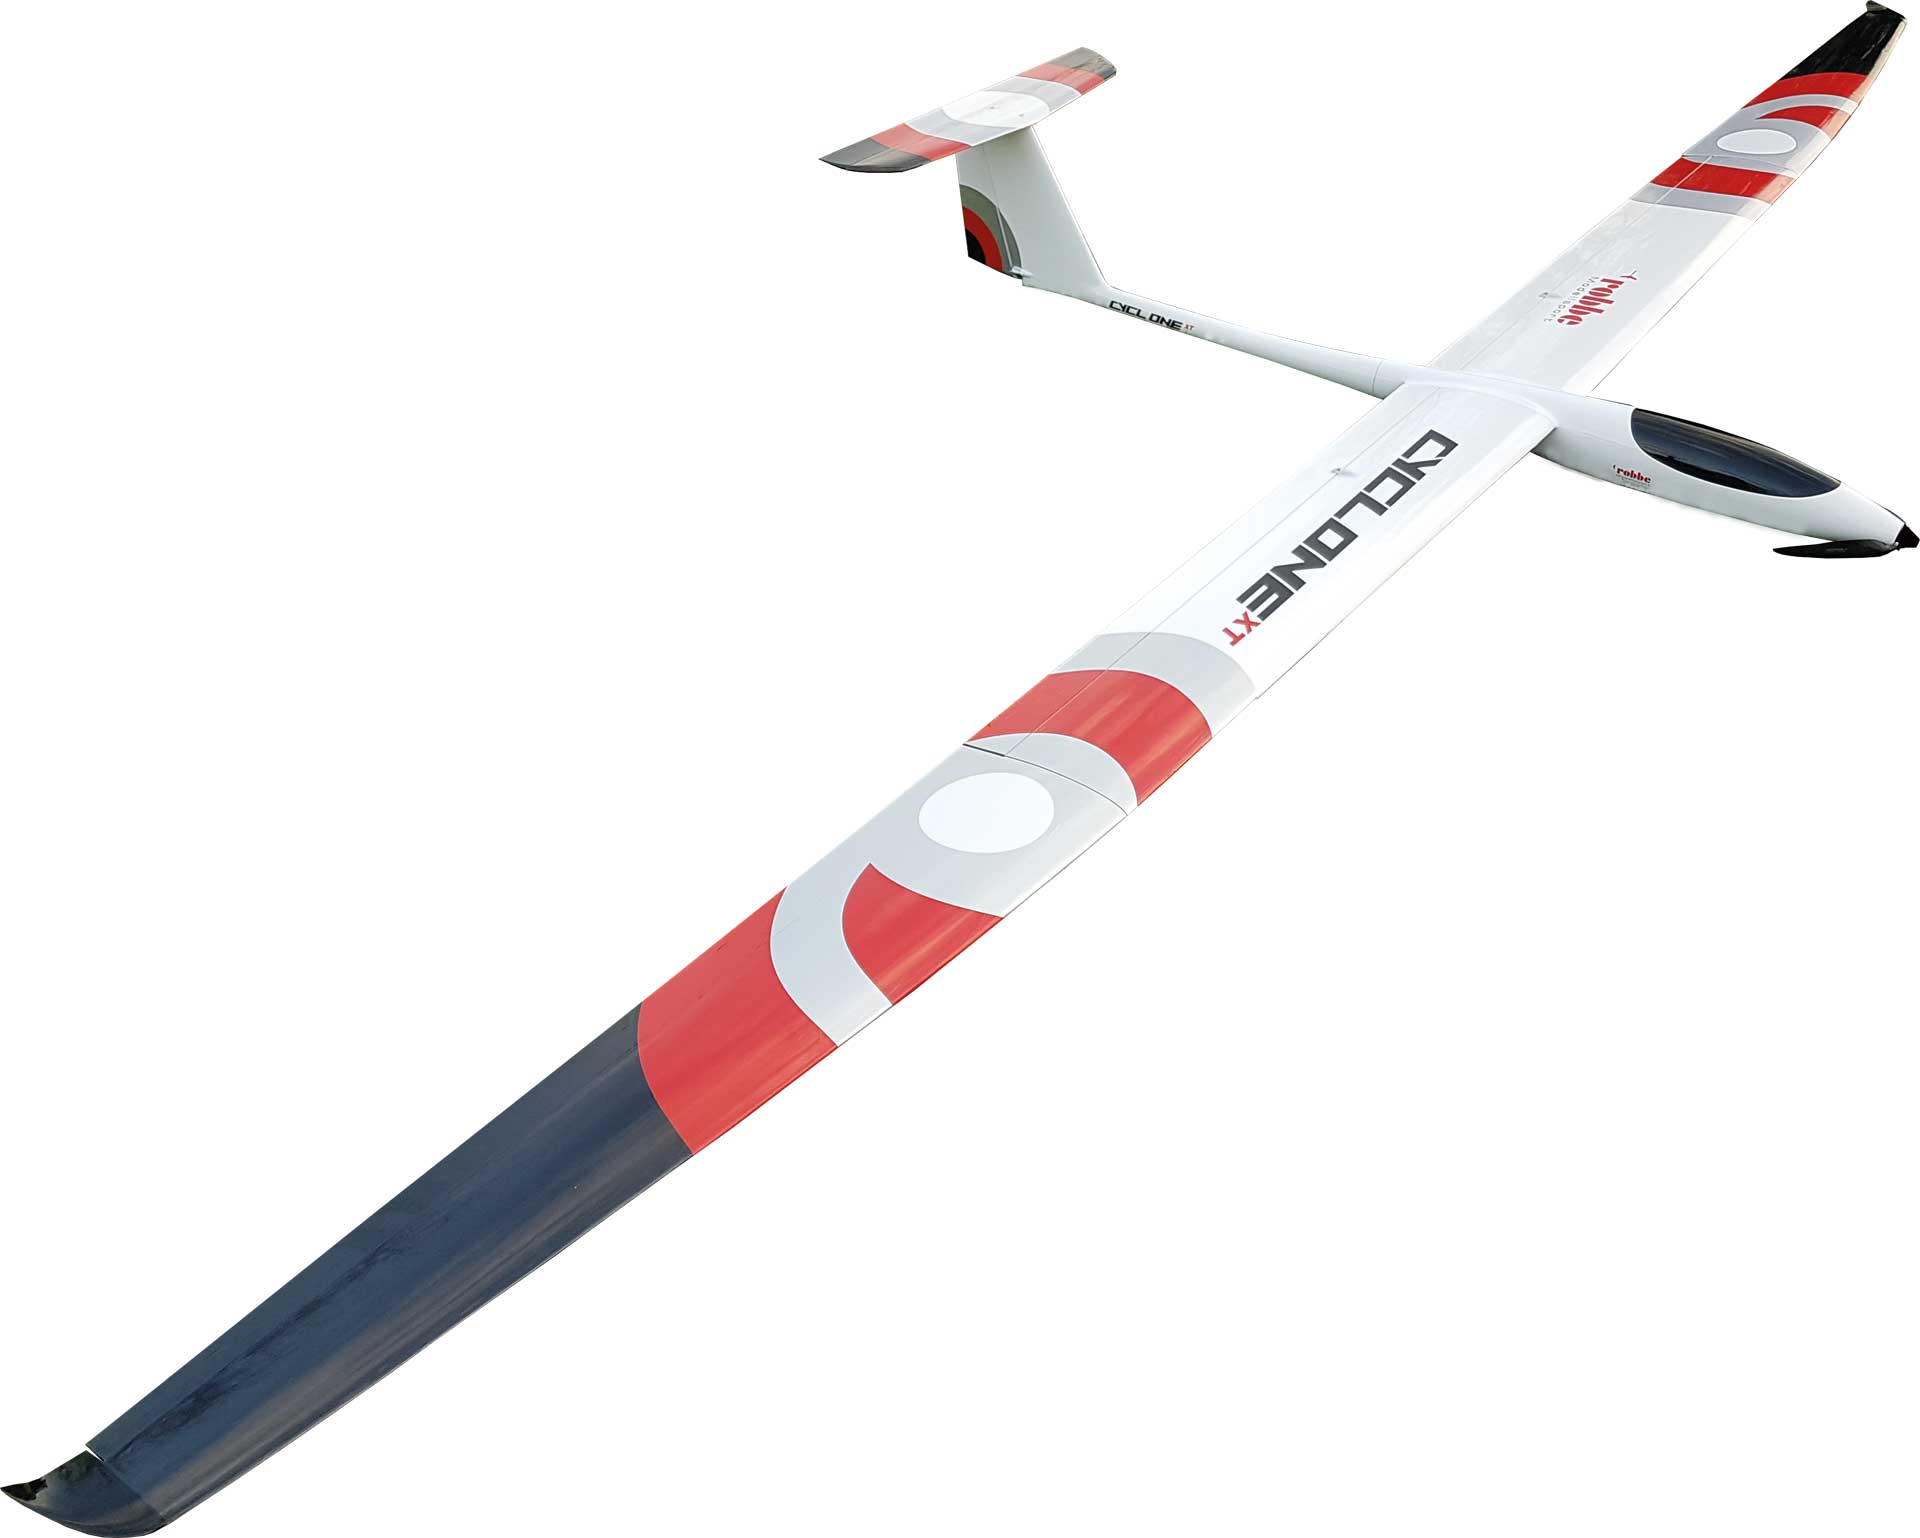 Robbe Modellsport Cyclone XT 6,2m PNP w. GRP FUSELAGE 4-piece wing with abachi planking